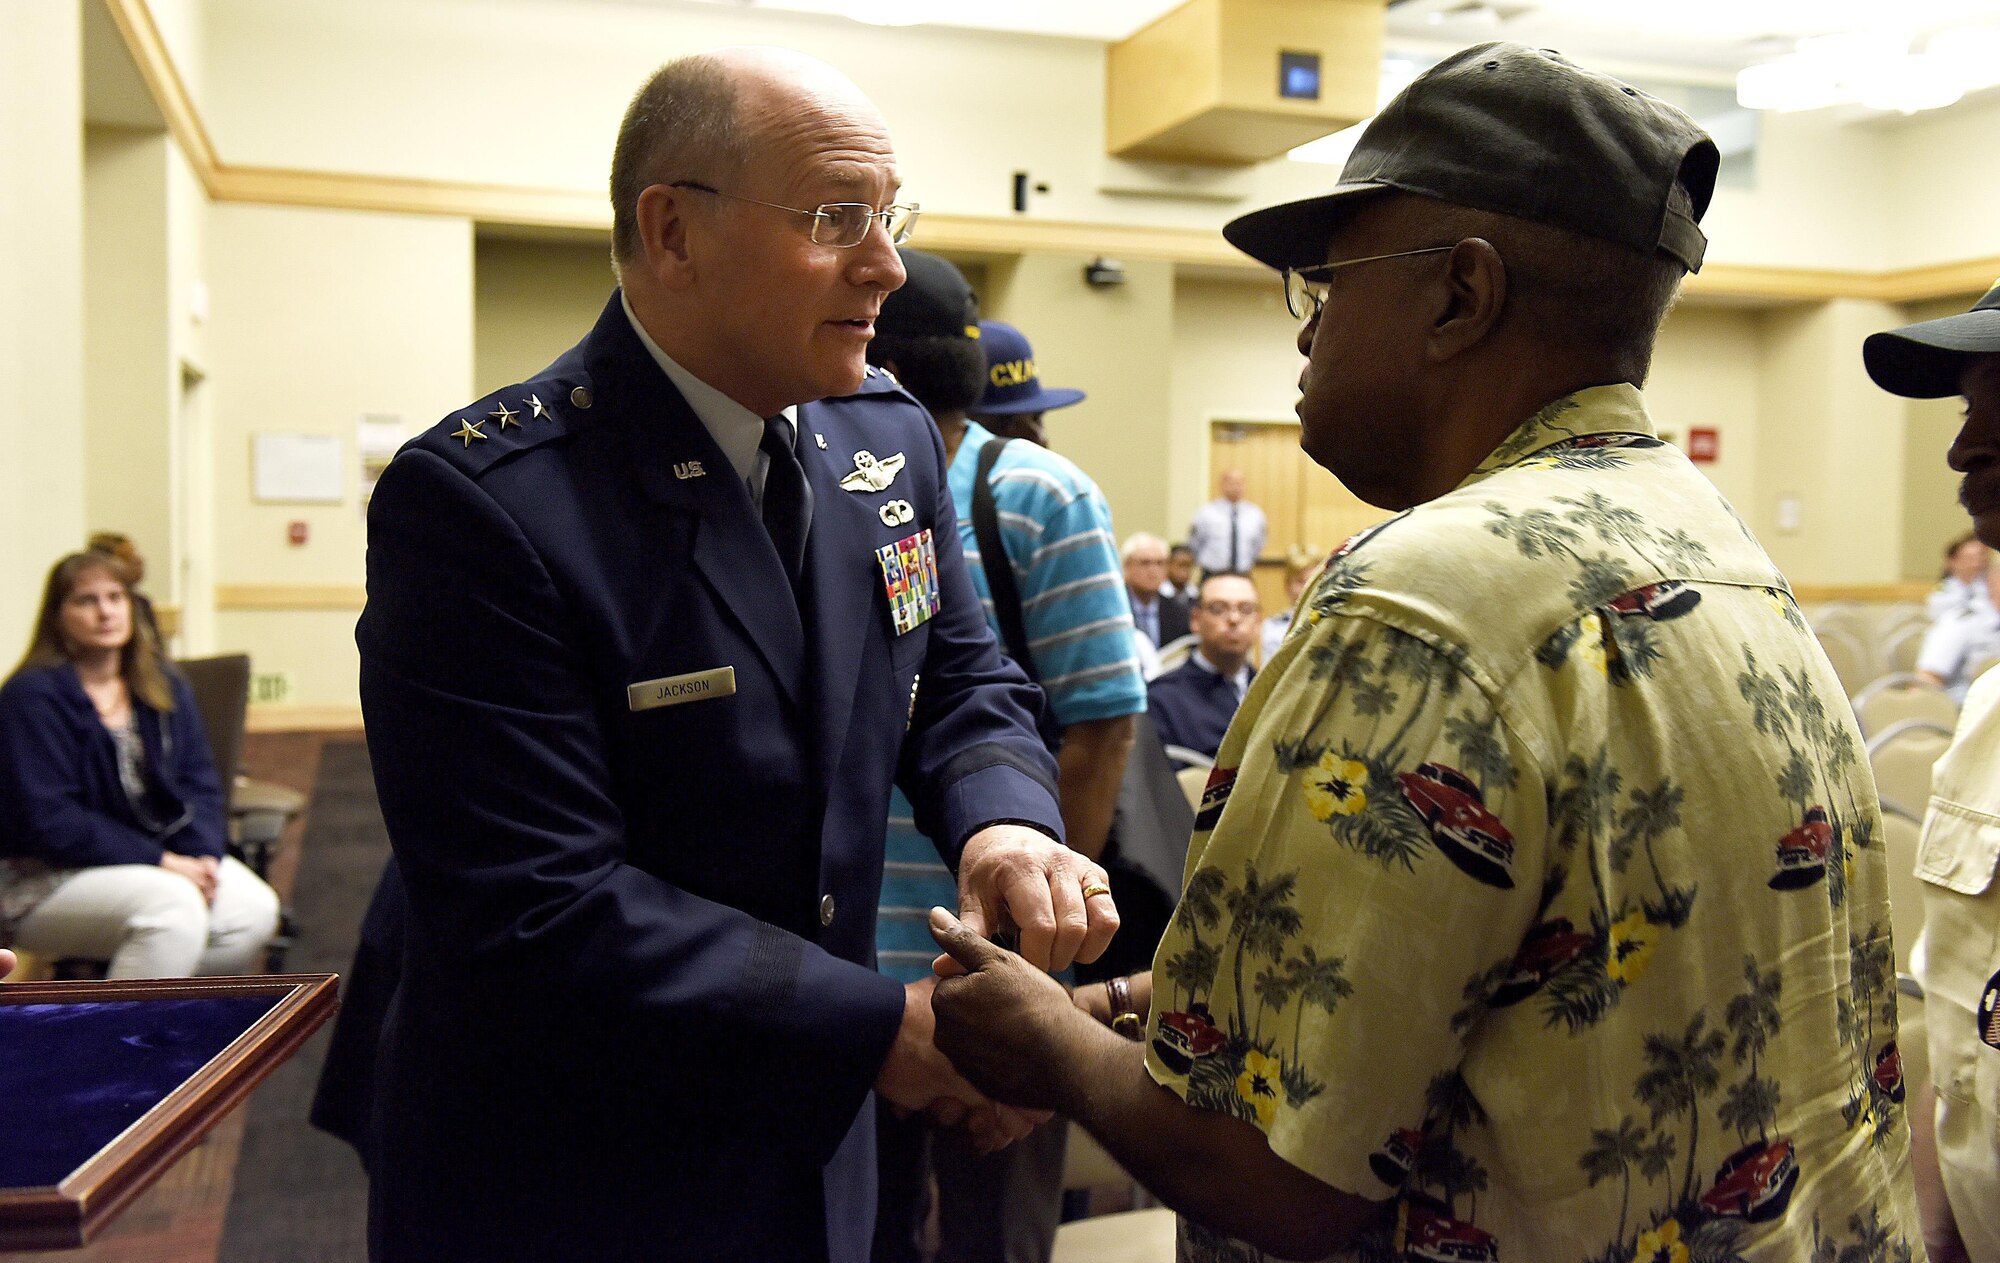 Lt. Gen. James Jackson, chief of the Air Force Reserve, presents a Vietnam War veteran with a pin during a ceremony at the Pentagon, Washington, D.C., June 21, 2016. More than 10 veterans were recognized during the ceremony. (U.S. Air Force photo by Staff Sgt. Alyssa C. Gibson/Released)